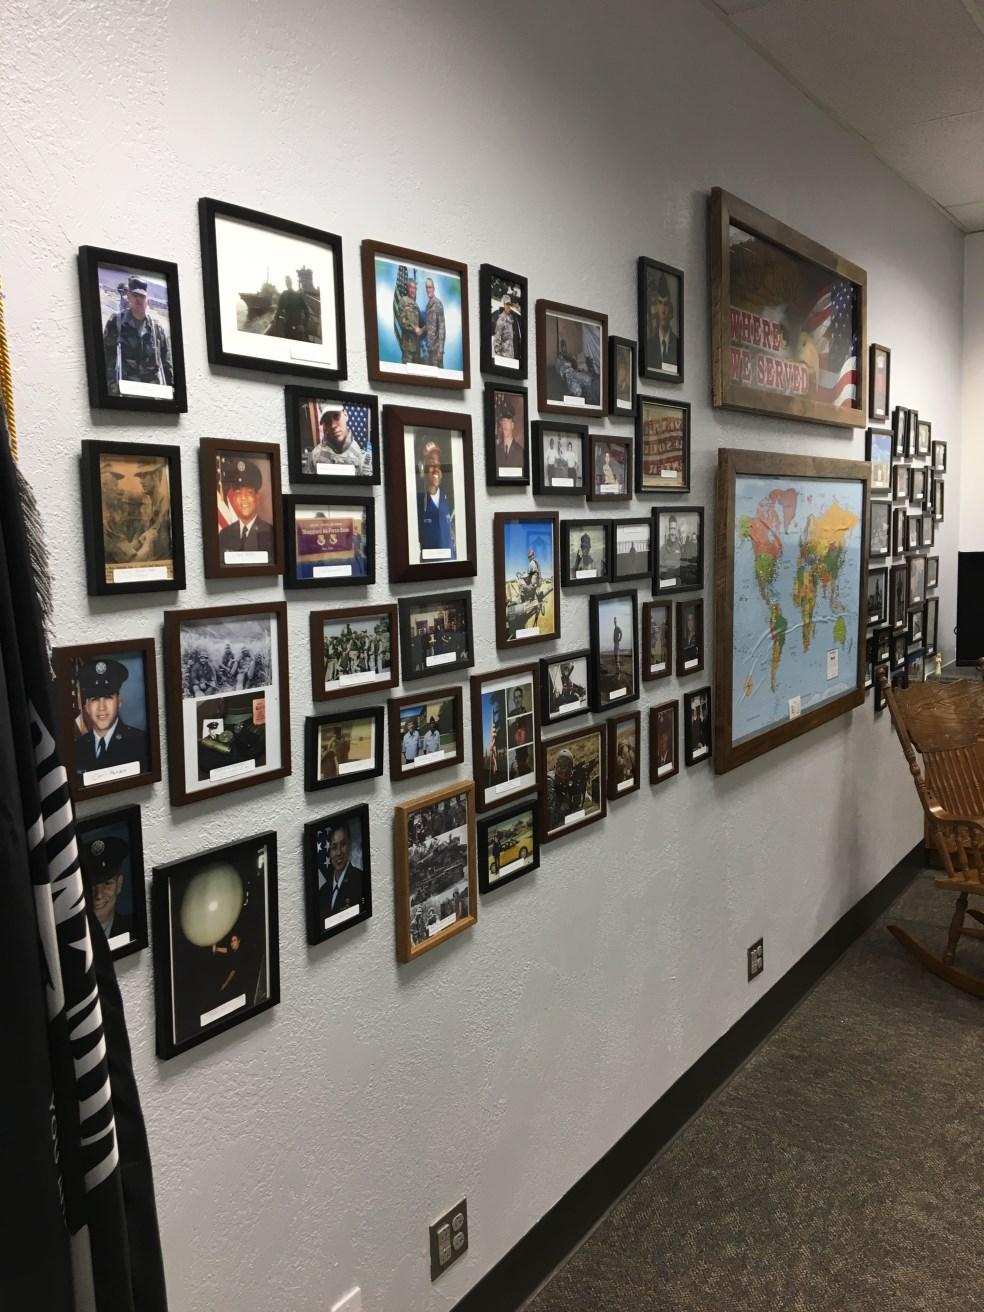 It began with just a few photos of student veterans, but now the Veterans Wall at the VRC has grown and is almost completely covered.